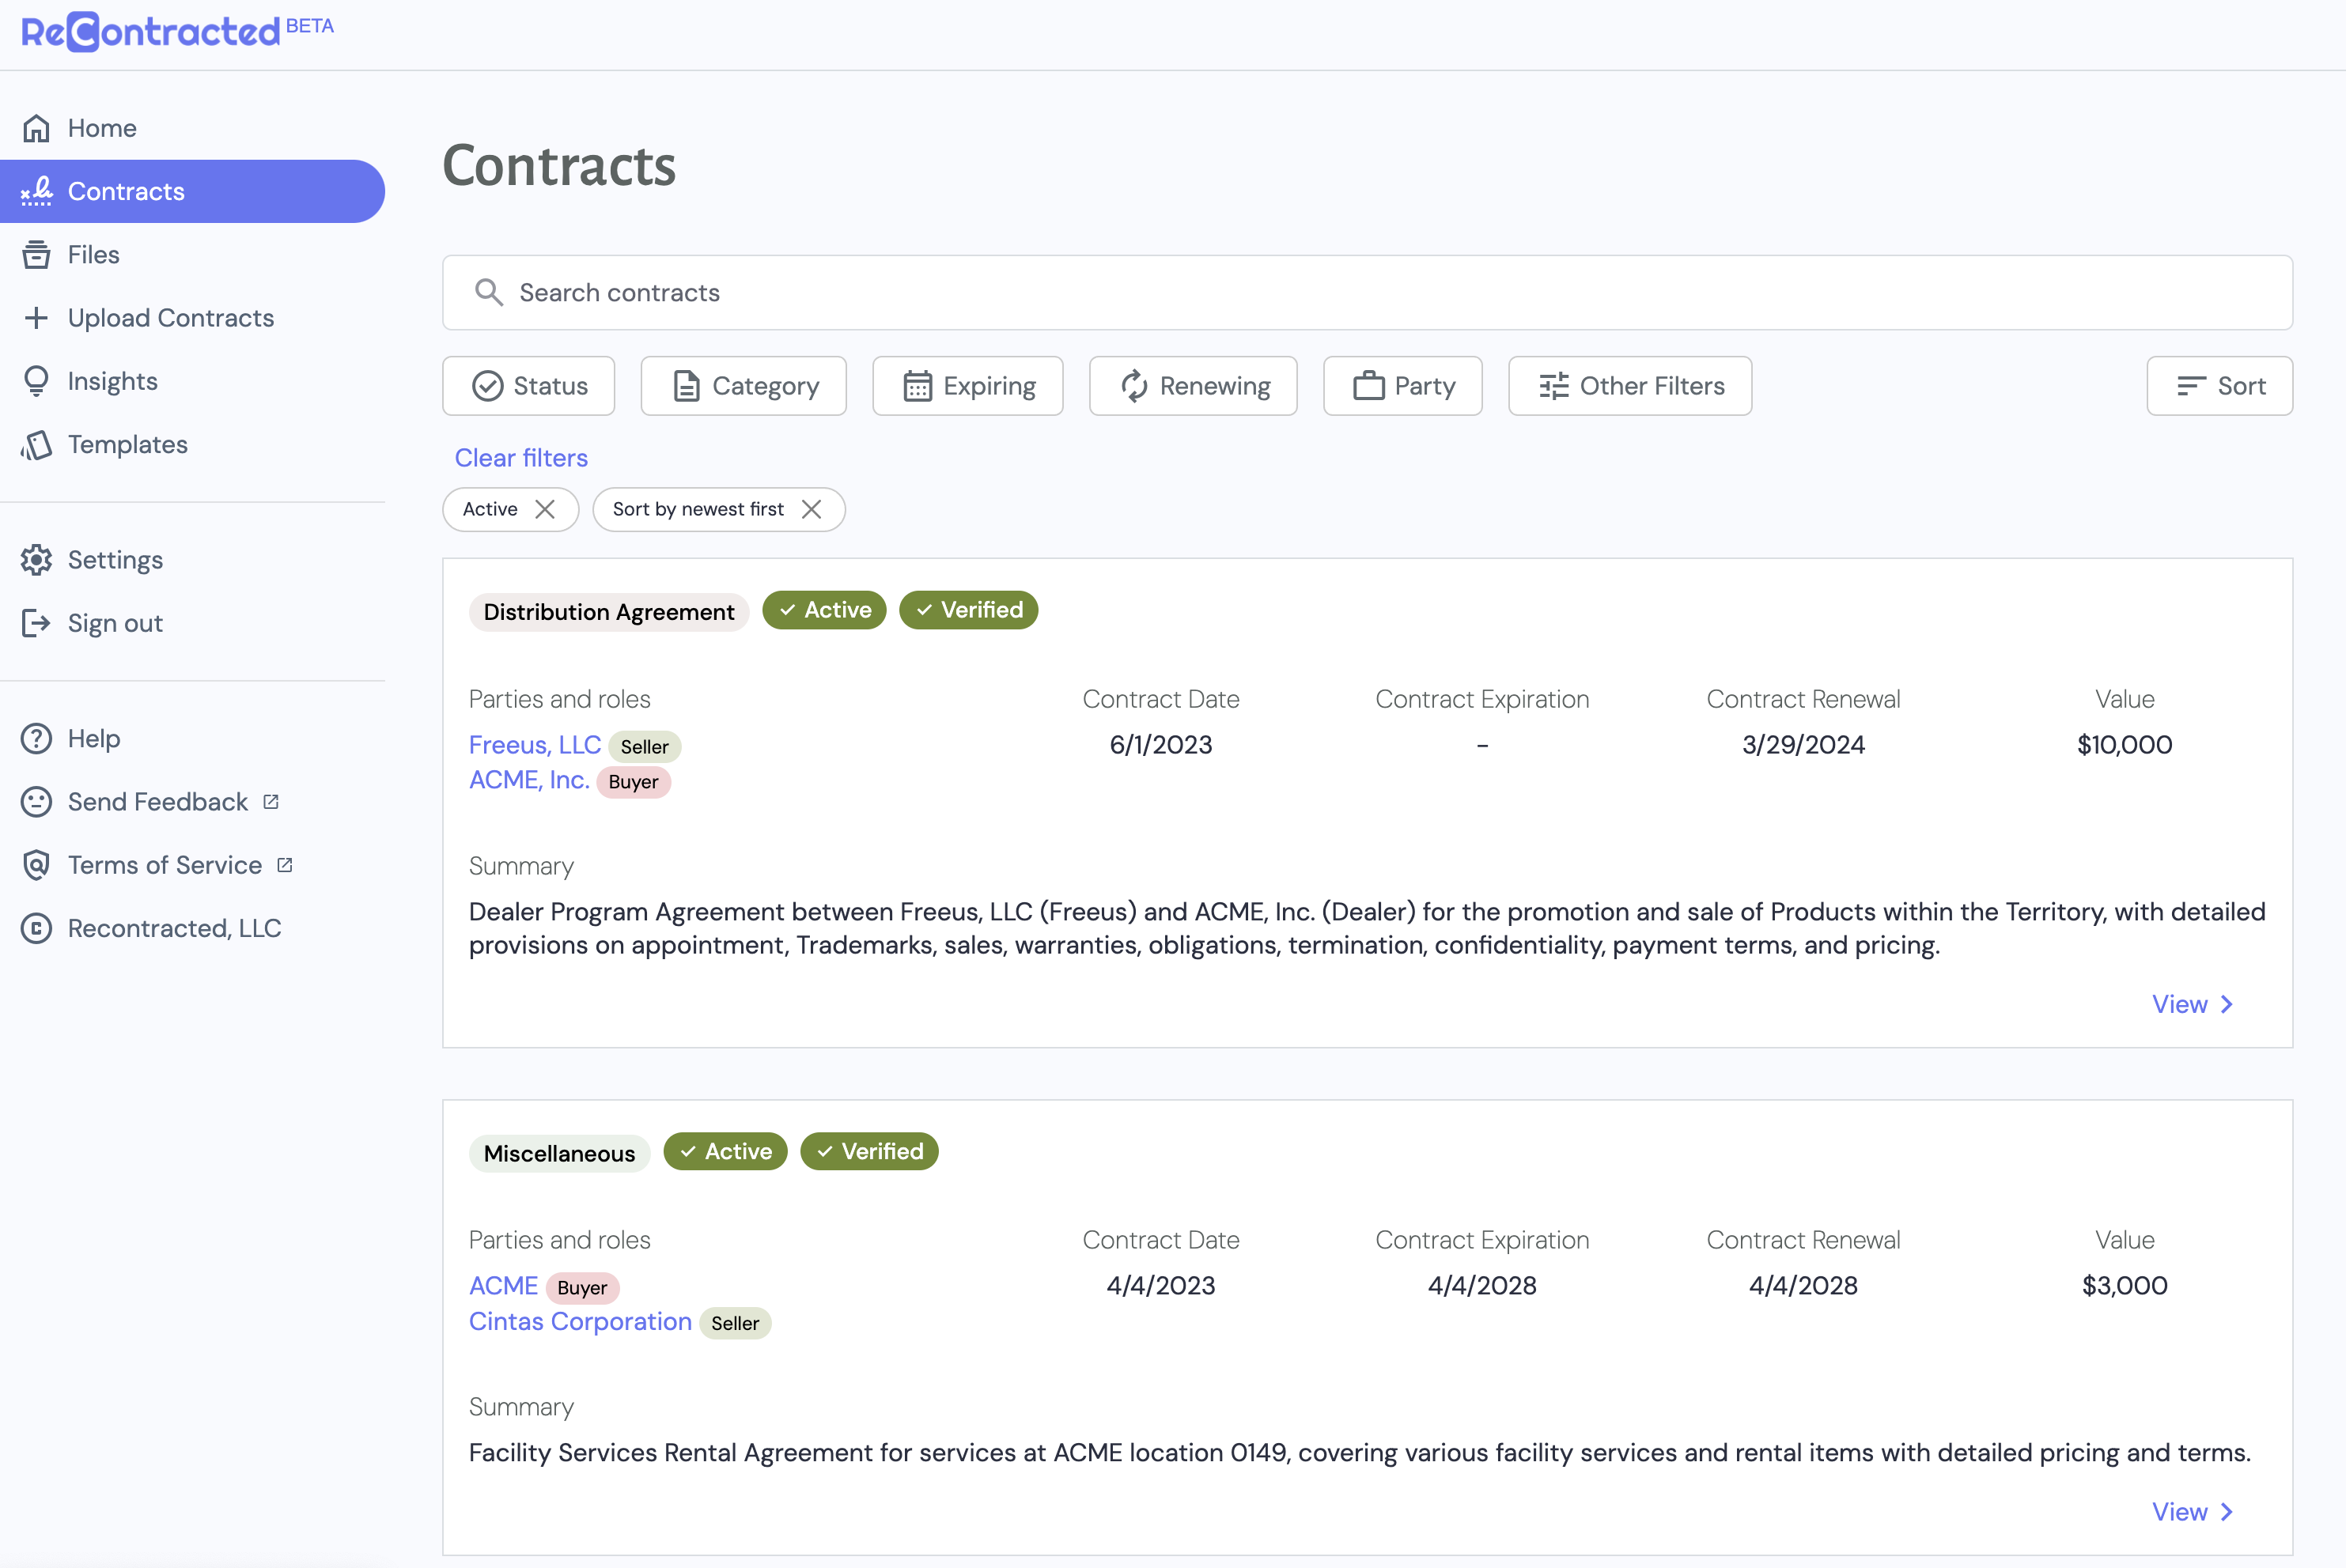 Recontracted - Manage contracts easily